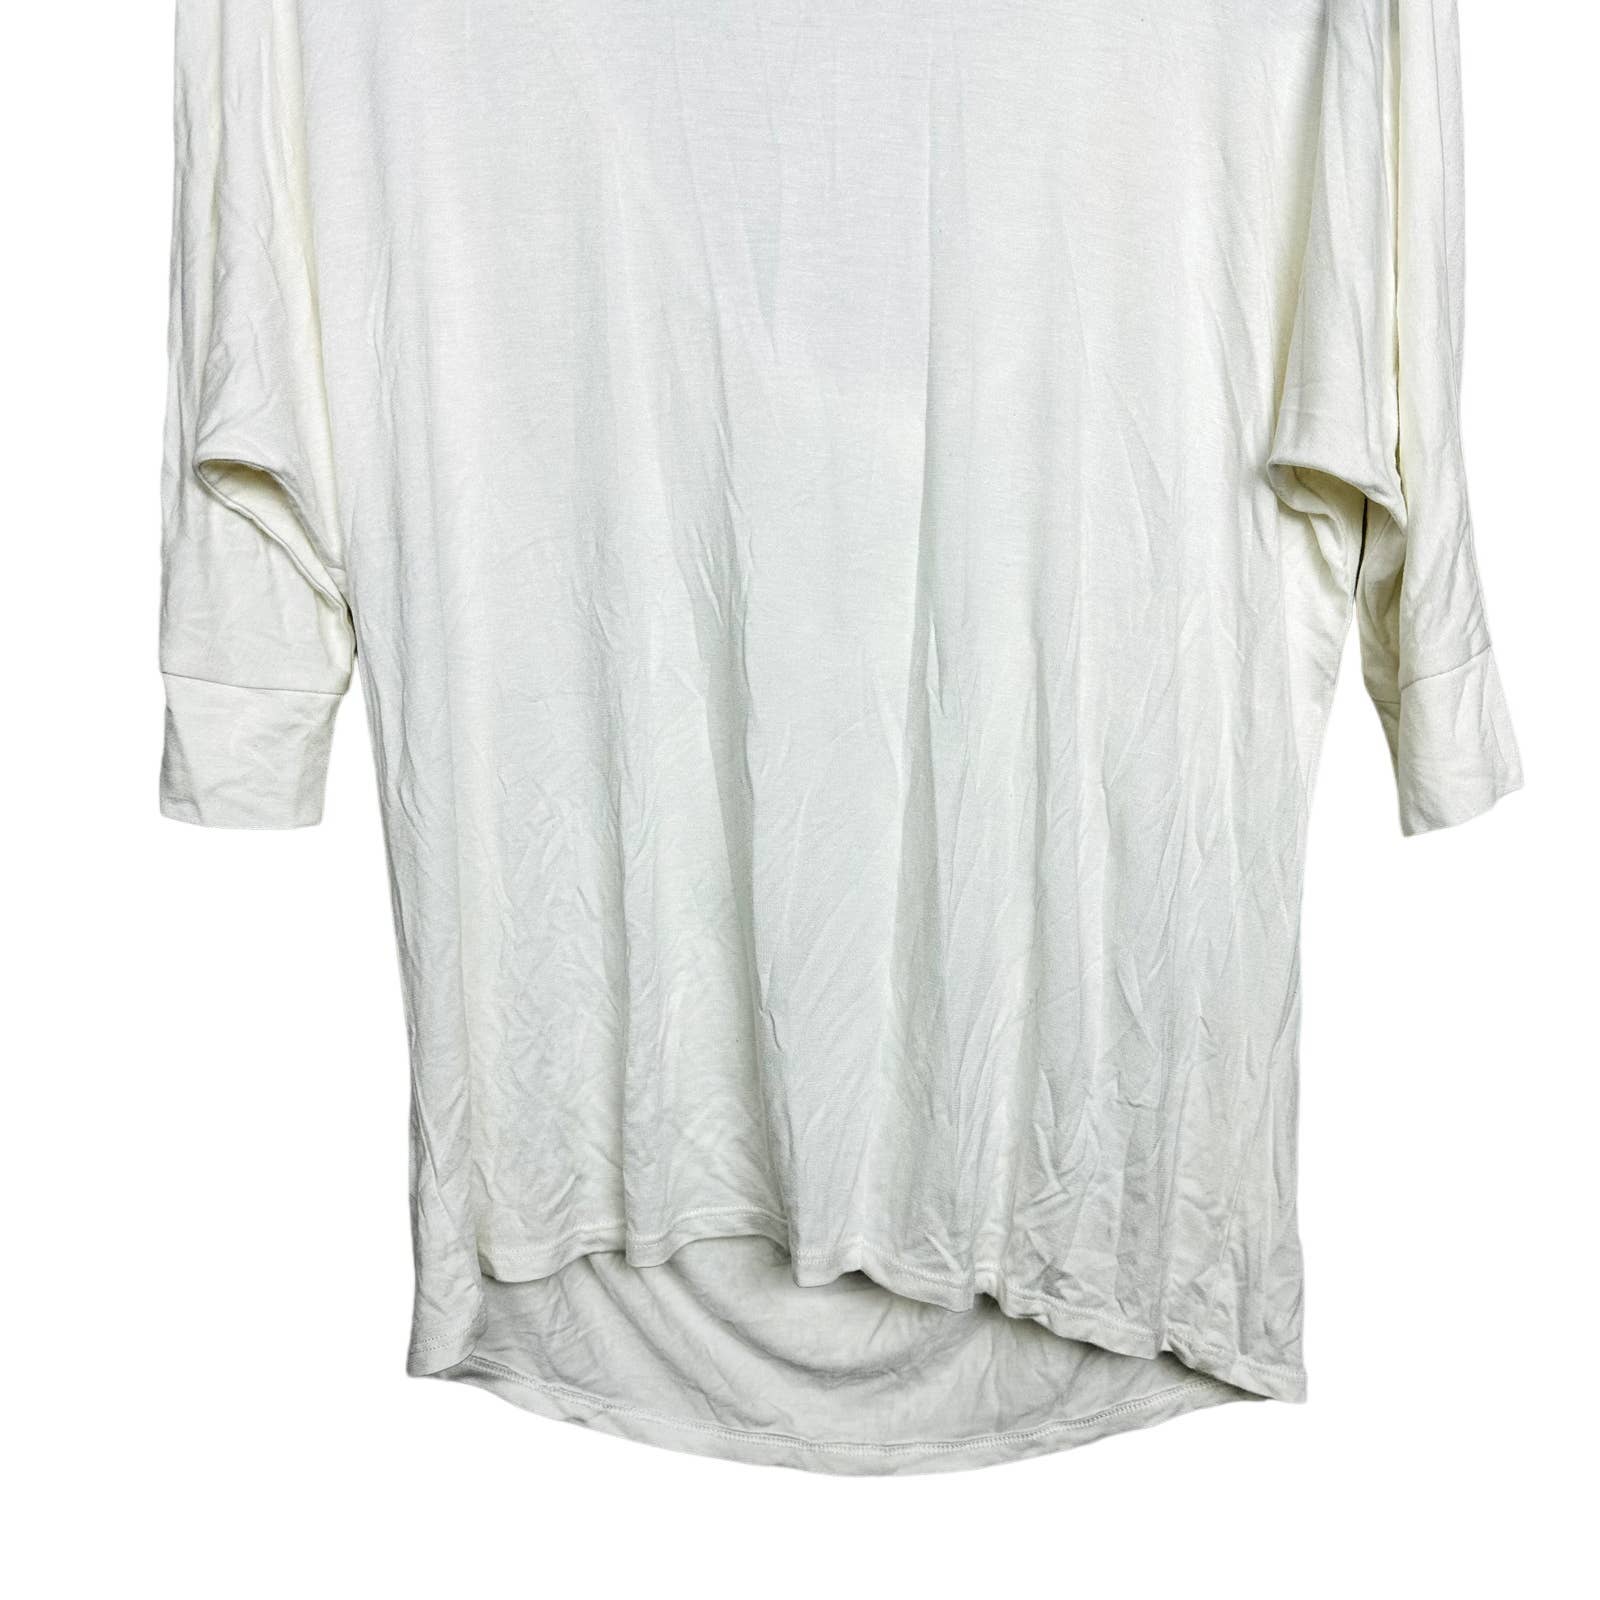 Chaser NWT Cut Out Draped Back Dolman 3/4 Sleeve Tunic Tops White Size Medium